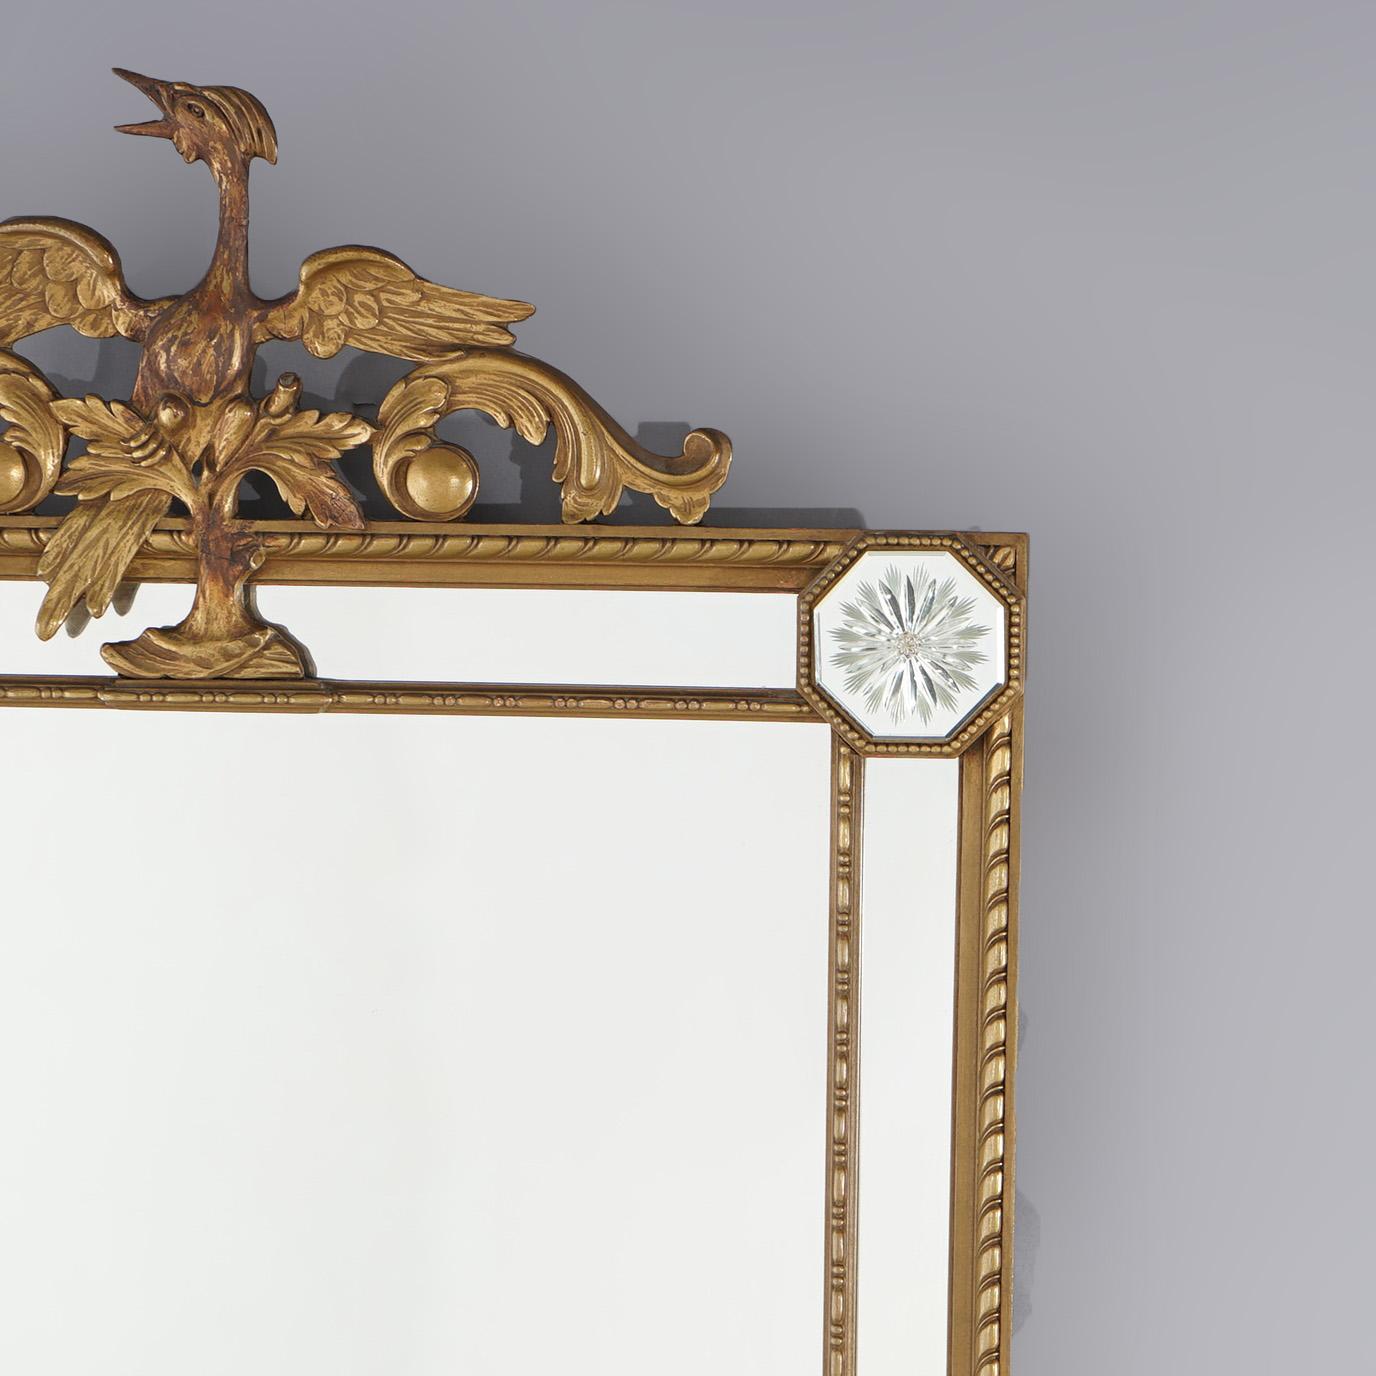 English Chinese Chippendale Regency Style Giltwood Parclose Wall Mirror C1920 For Sale 1